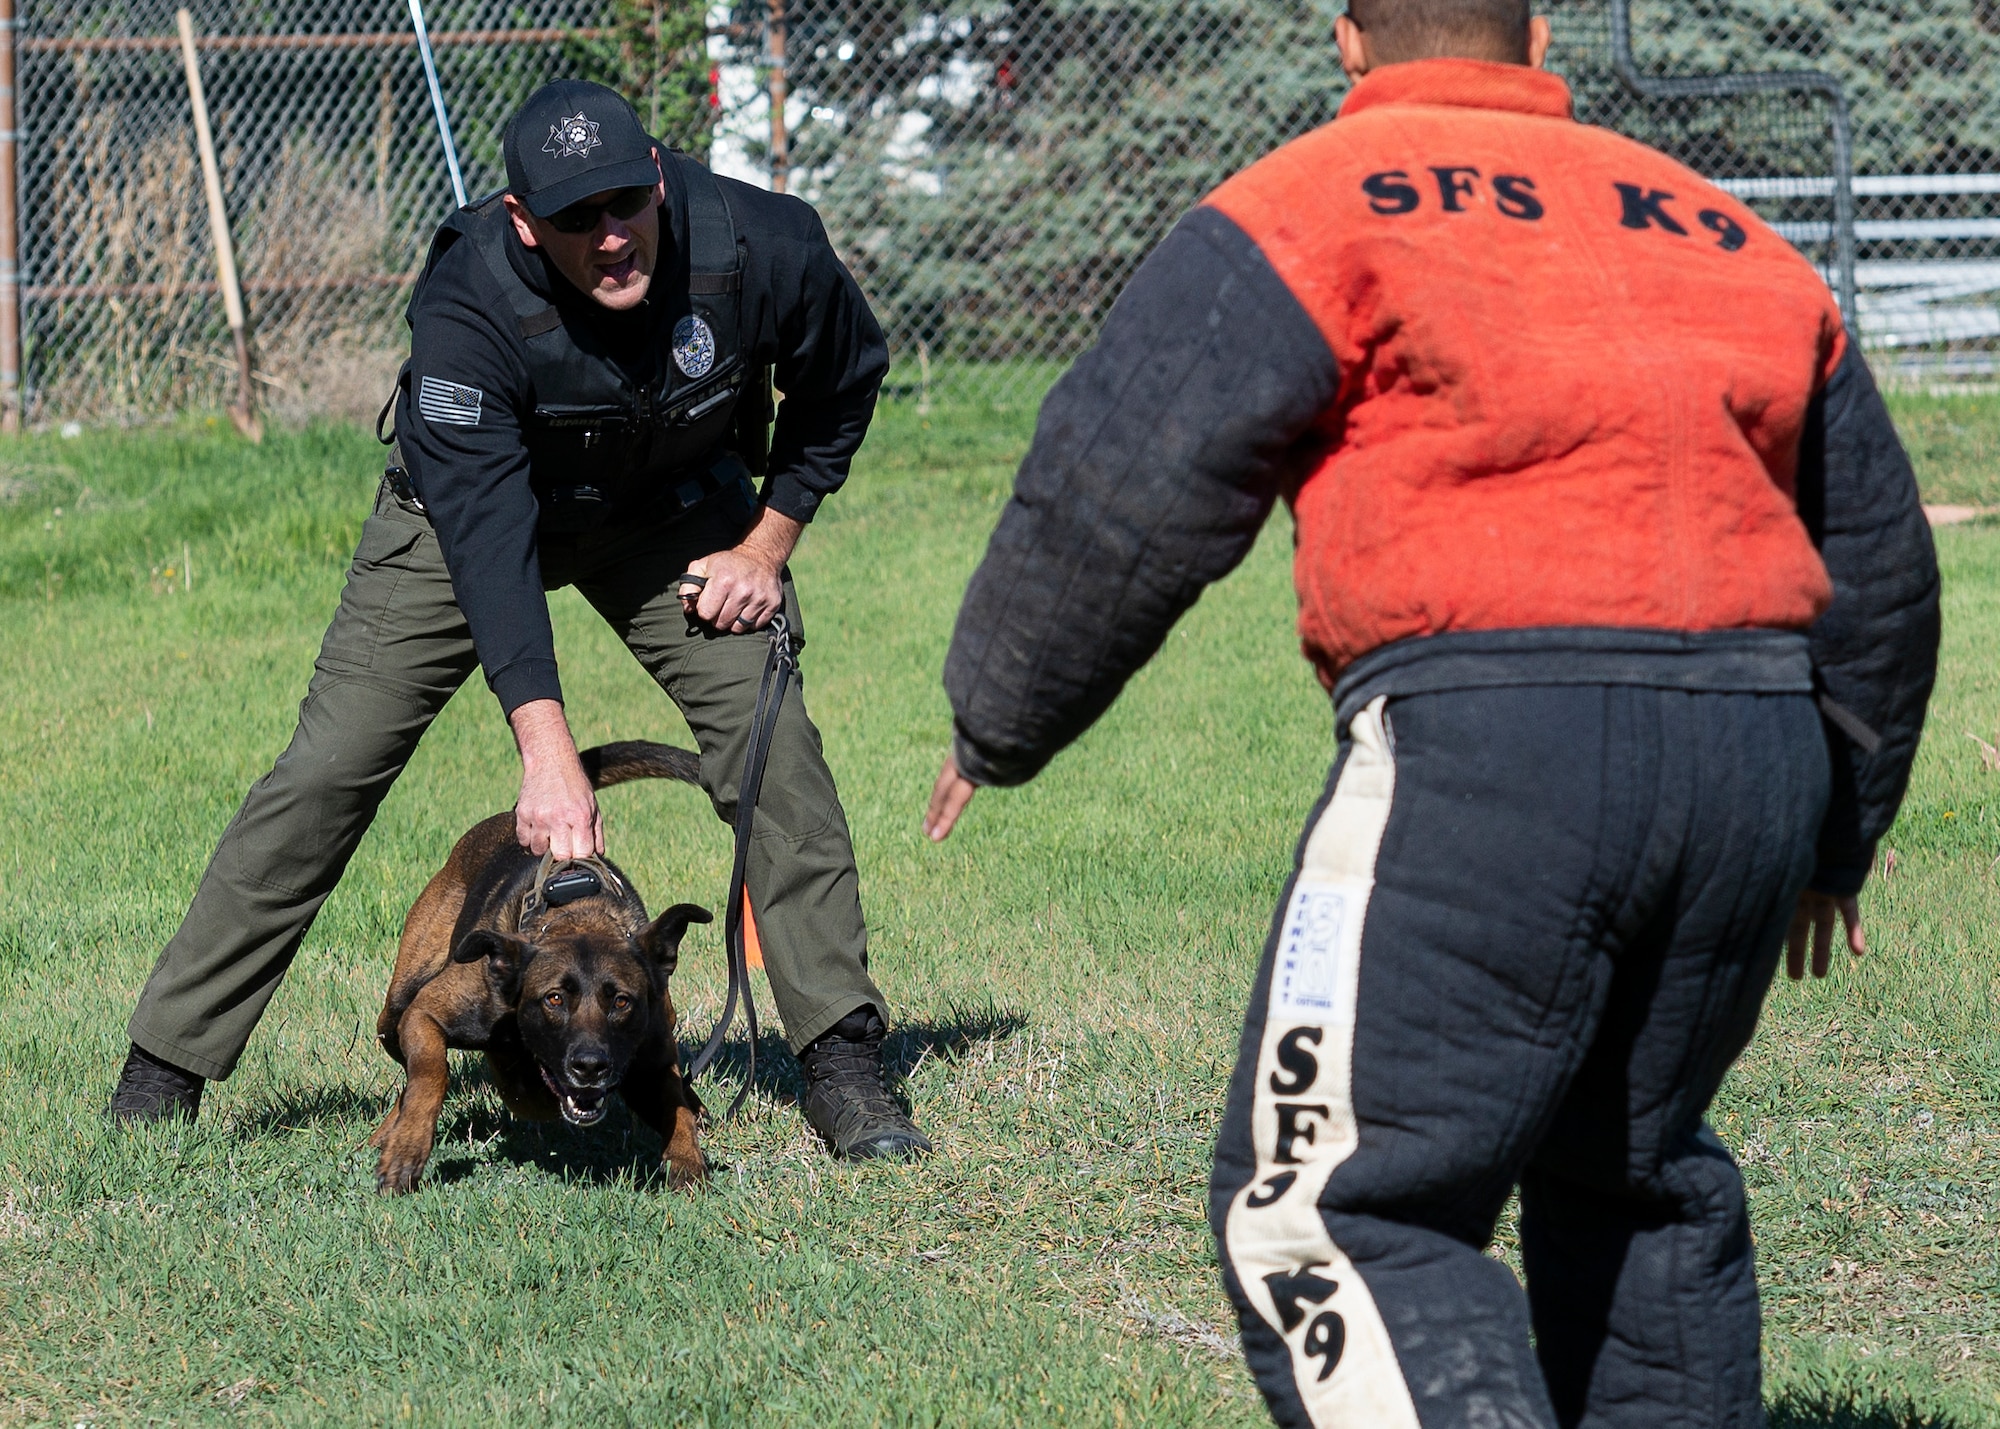 Brandon Esparza, Meridian Police Department officer, secures his K-9, KB, as he prepares to release it to deter the decoy in the bitesuit.